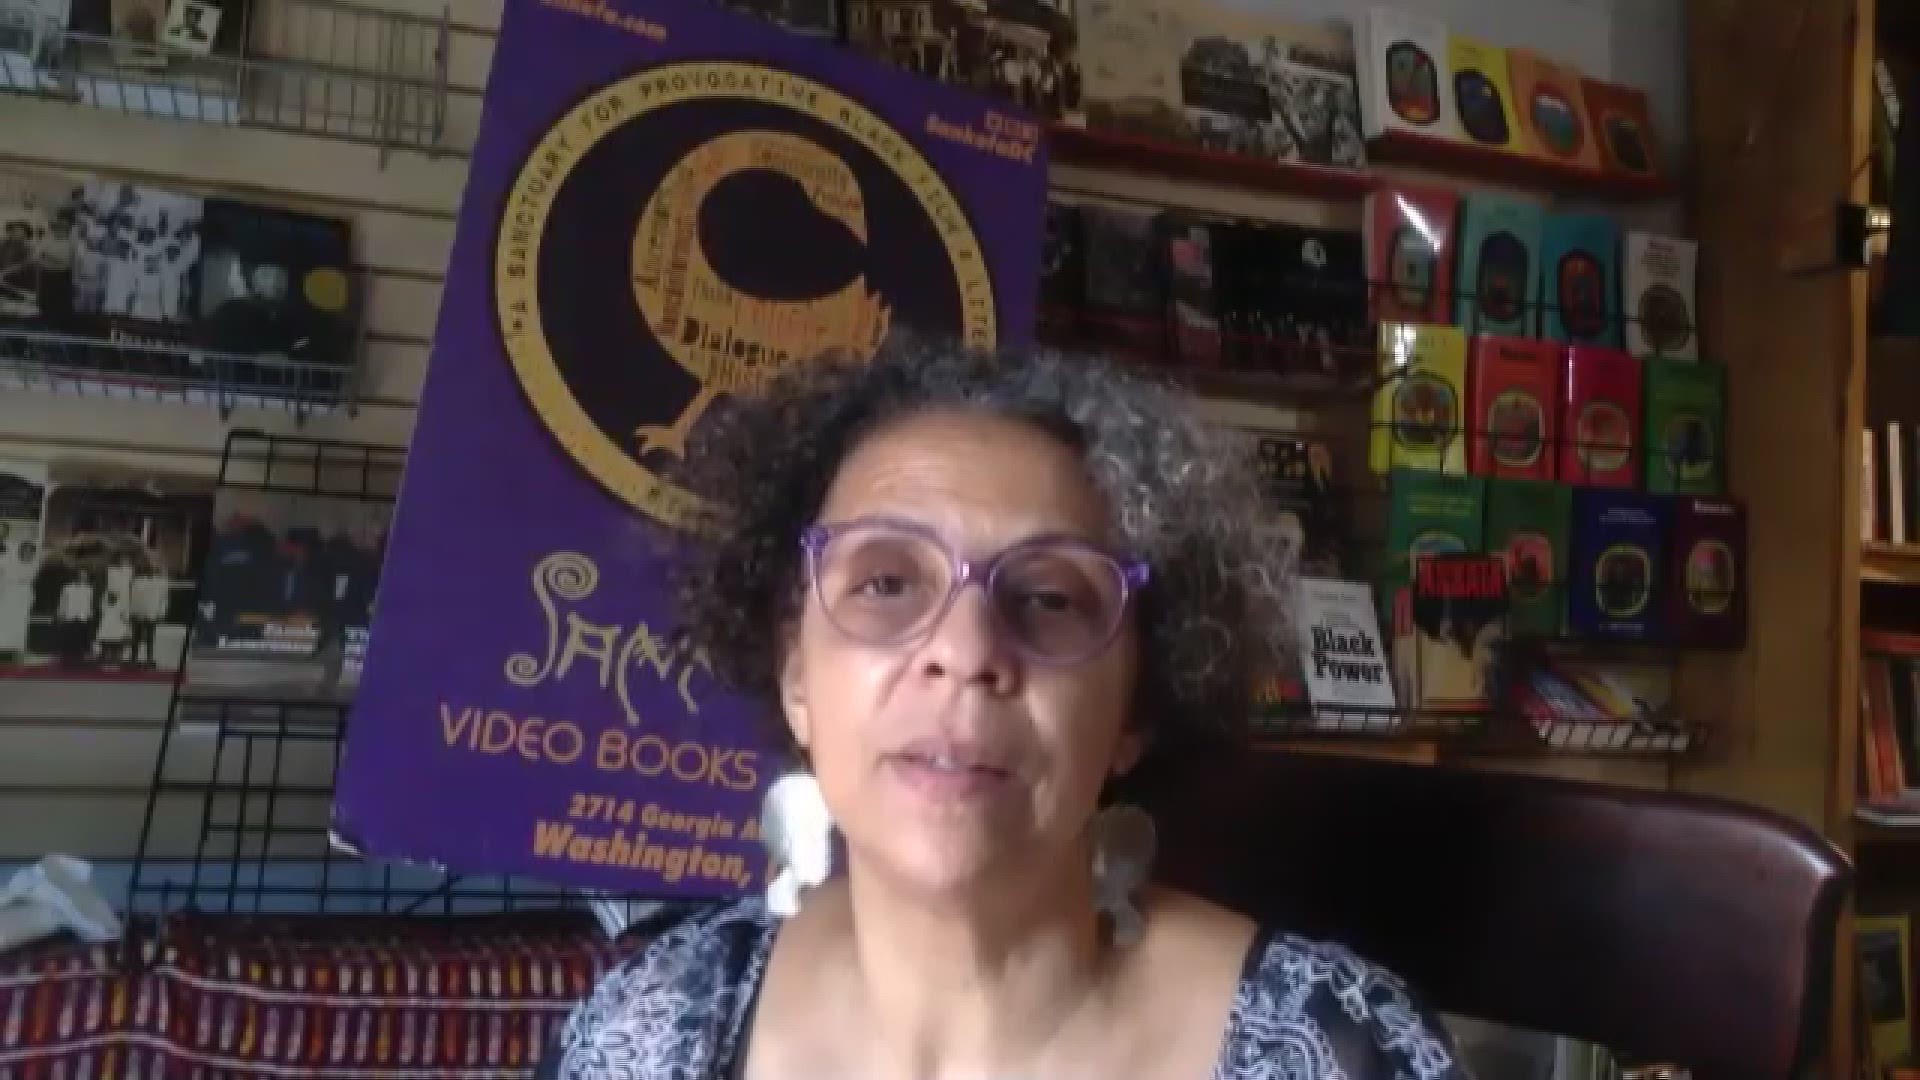 Sankofa and Loyalty Bookstore owners discuss anti-racist books that have been in high demand over the last few weeks